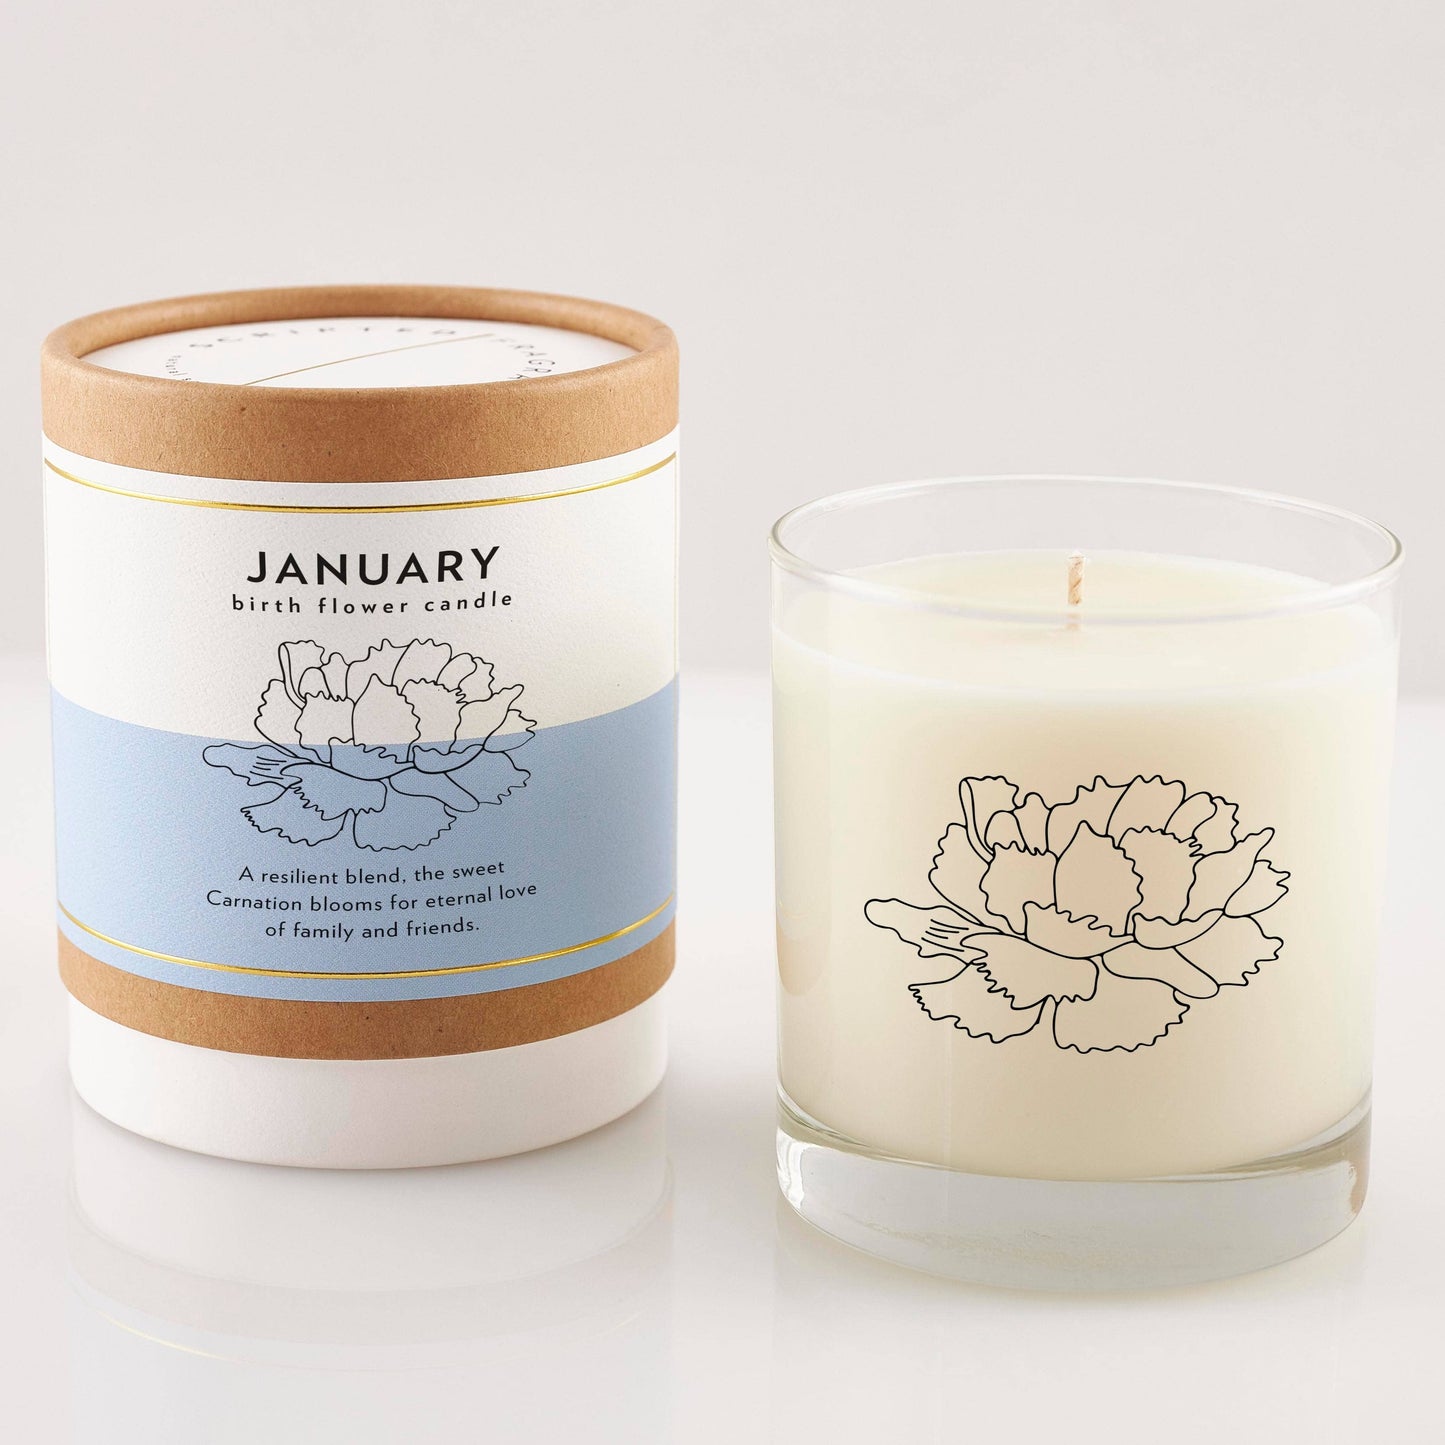 January Birth Flower Candle&Glass